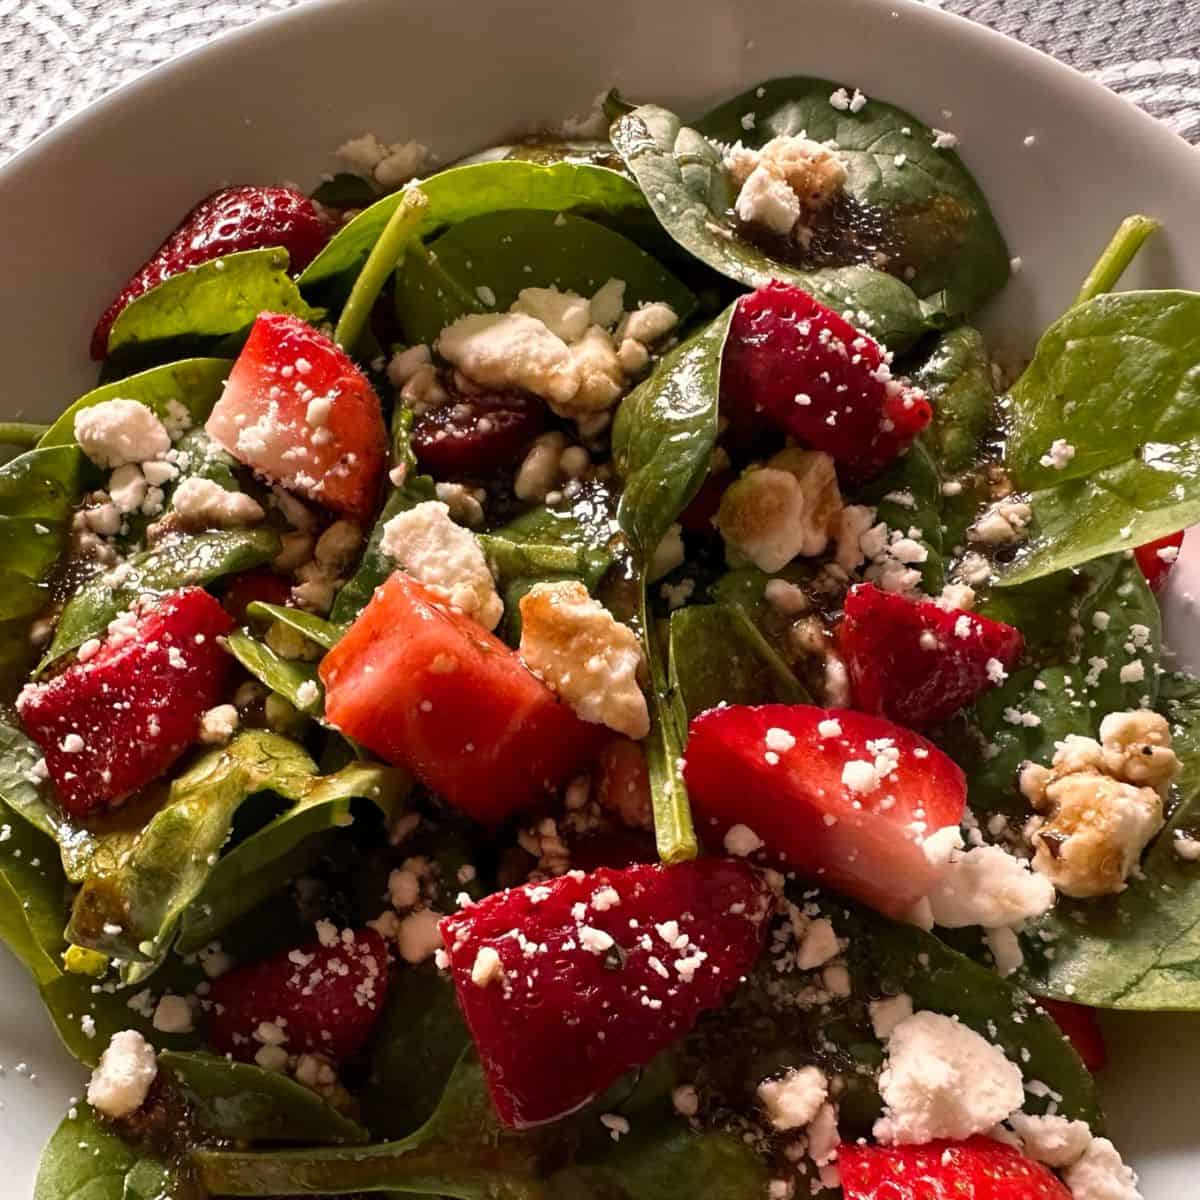 Strawberry spinach salad with feta cheese and balsamic dressing